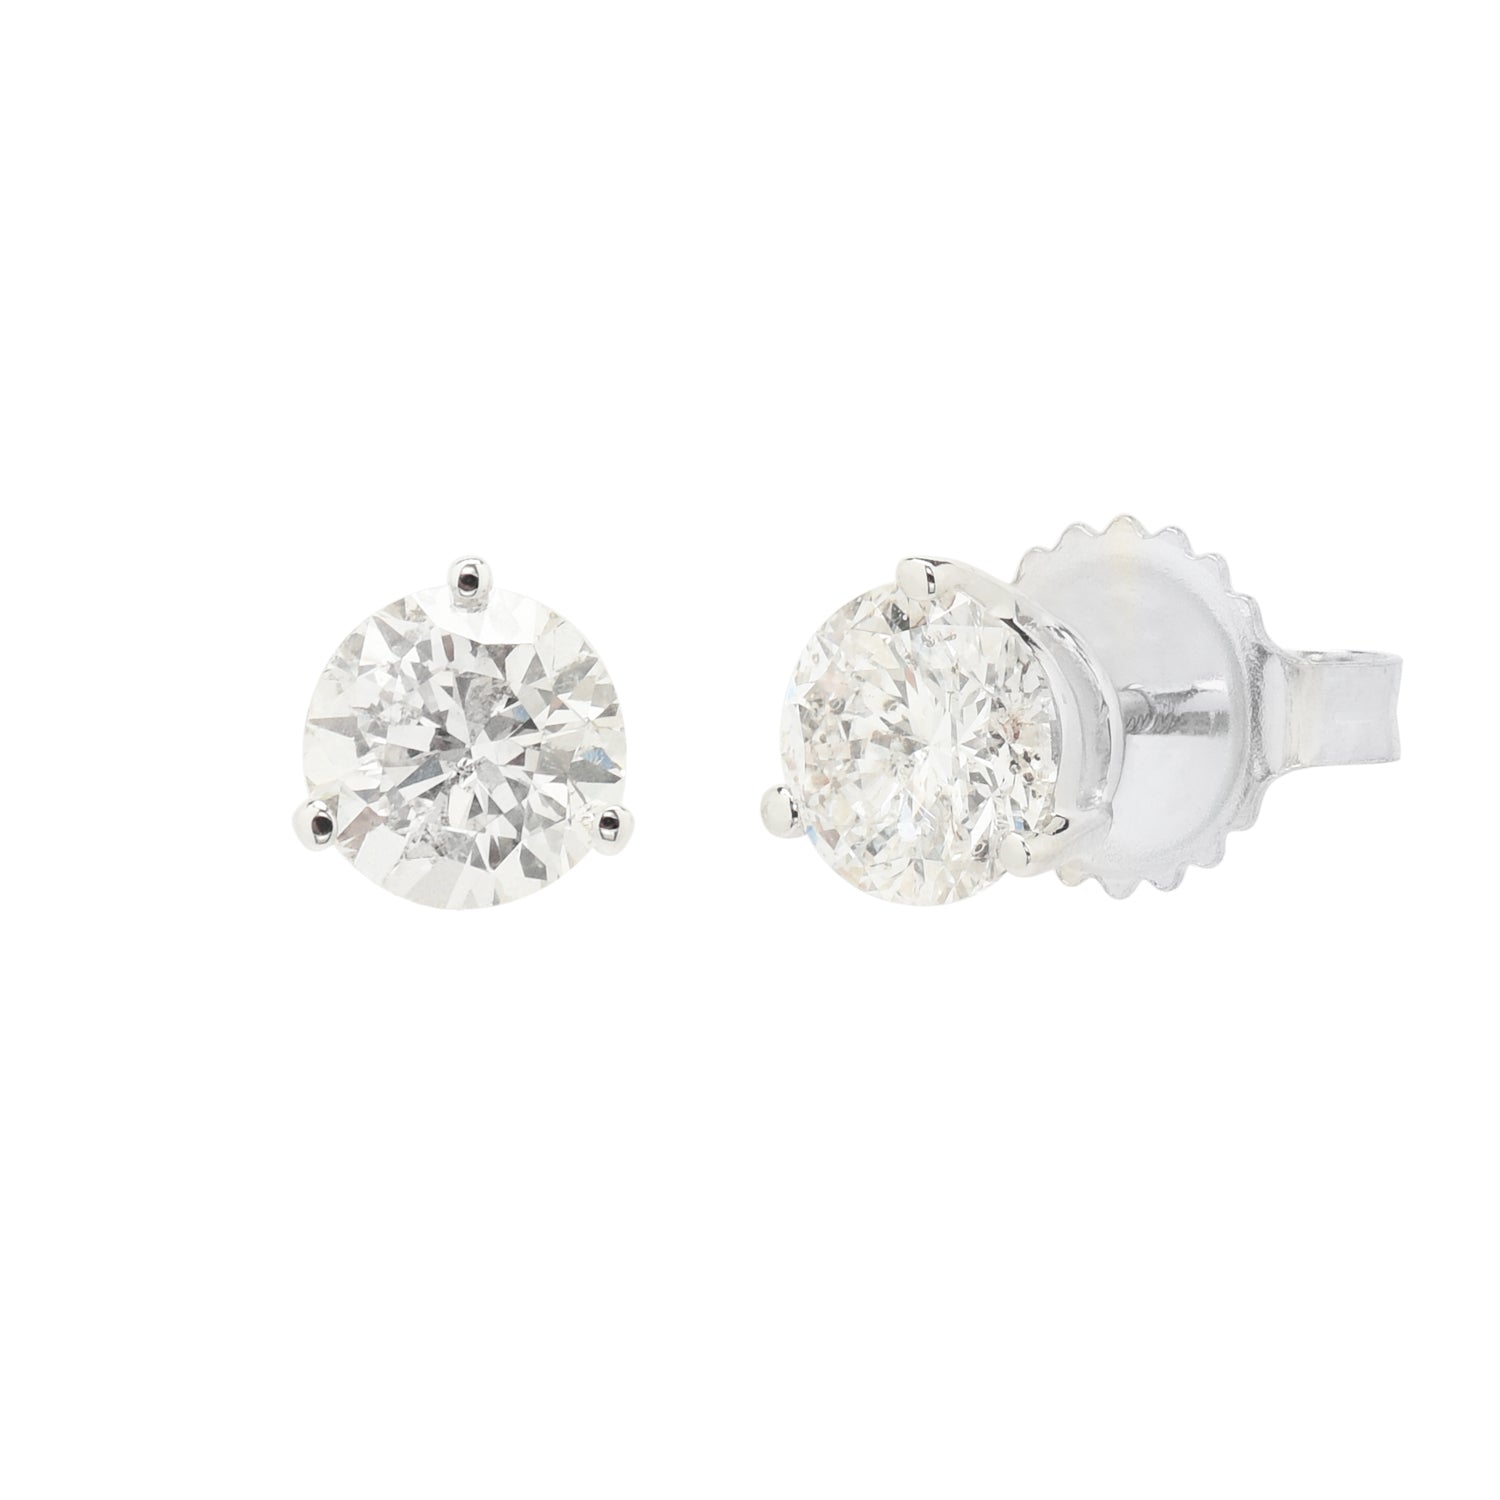 Northern Star Three Prong Diamond Stud Earrings in 14kt White Gold (1 1/4ct tw)